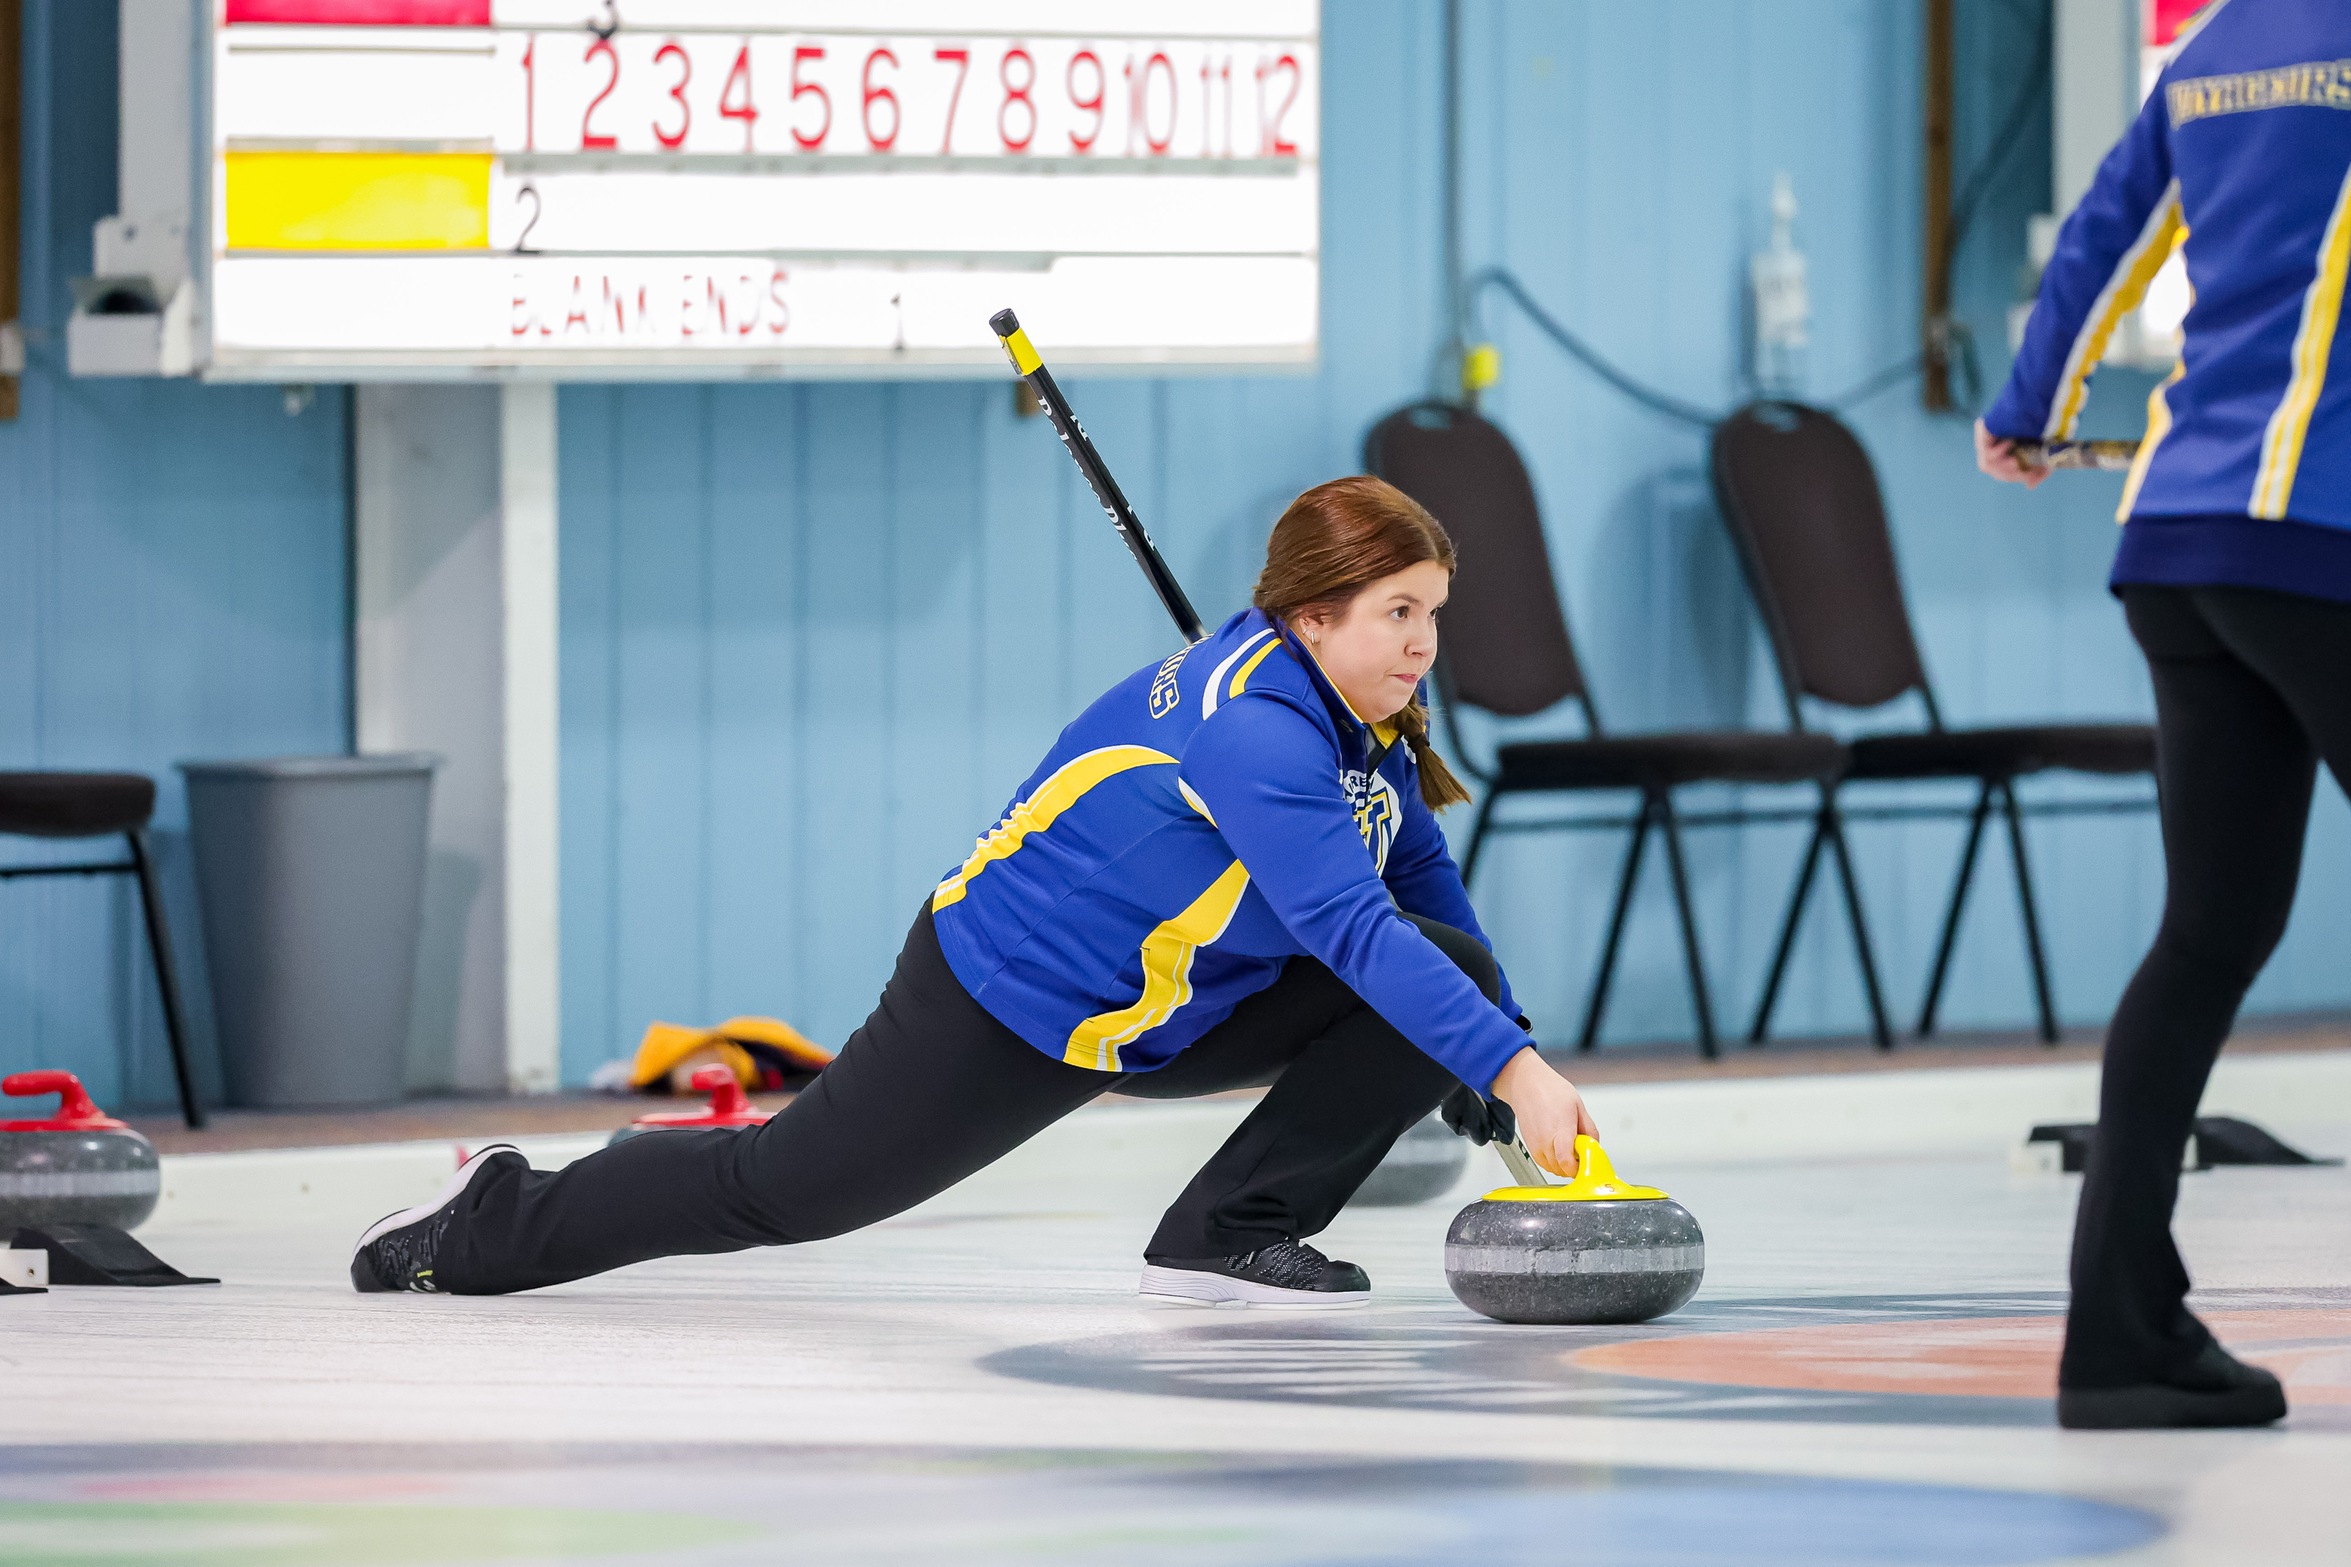 image of curling skip Bella Lehtimaki Croisier lunging forward on the ice